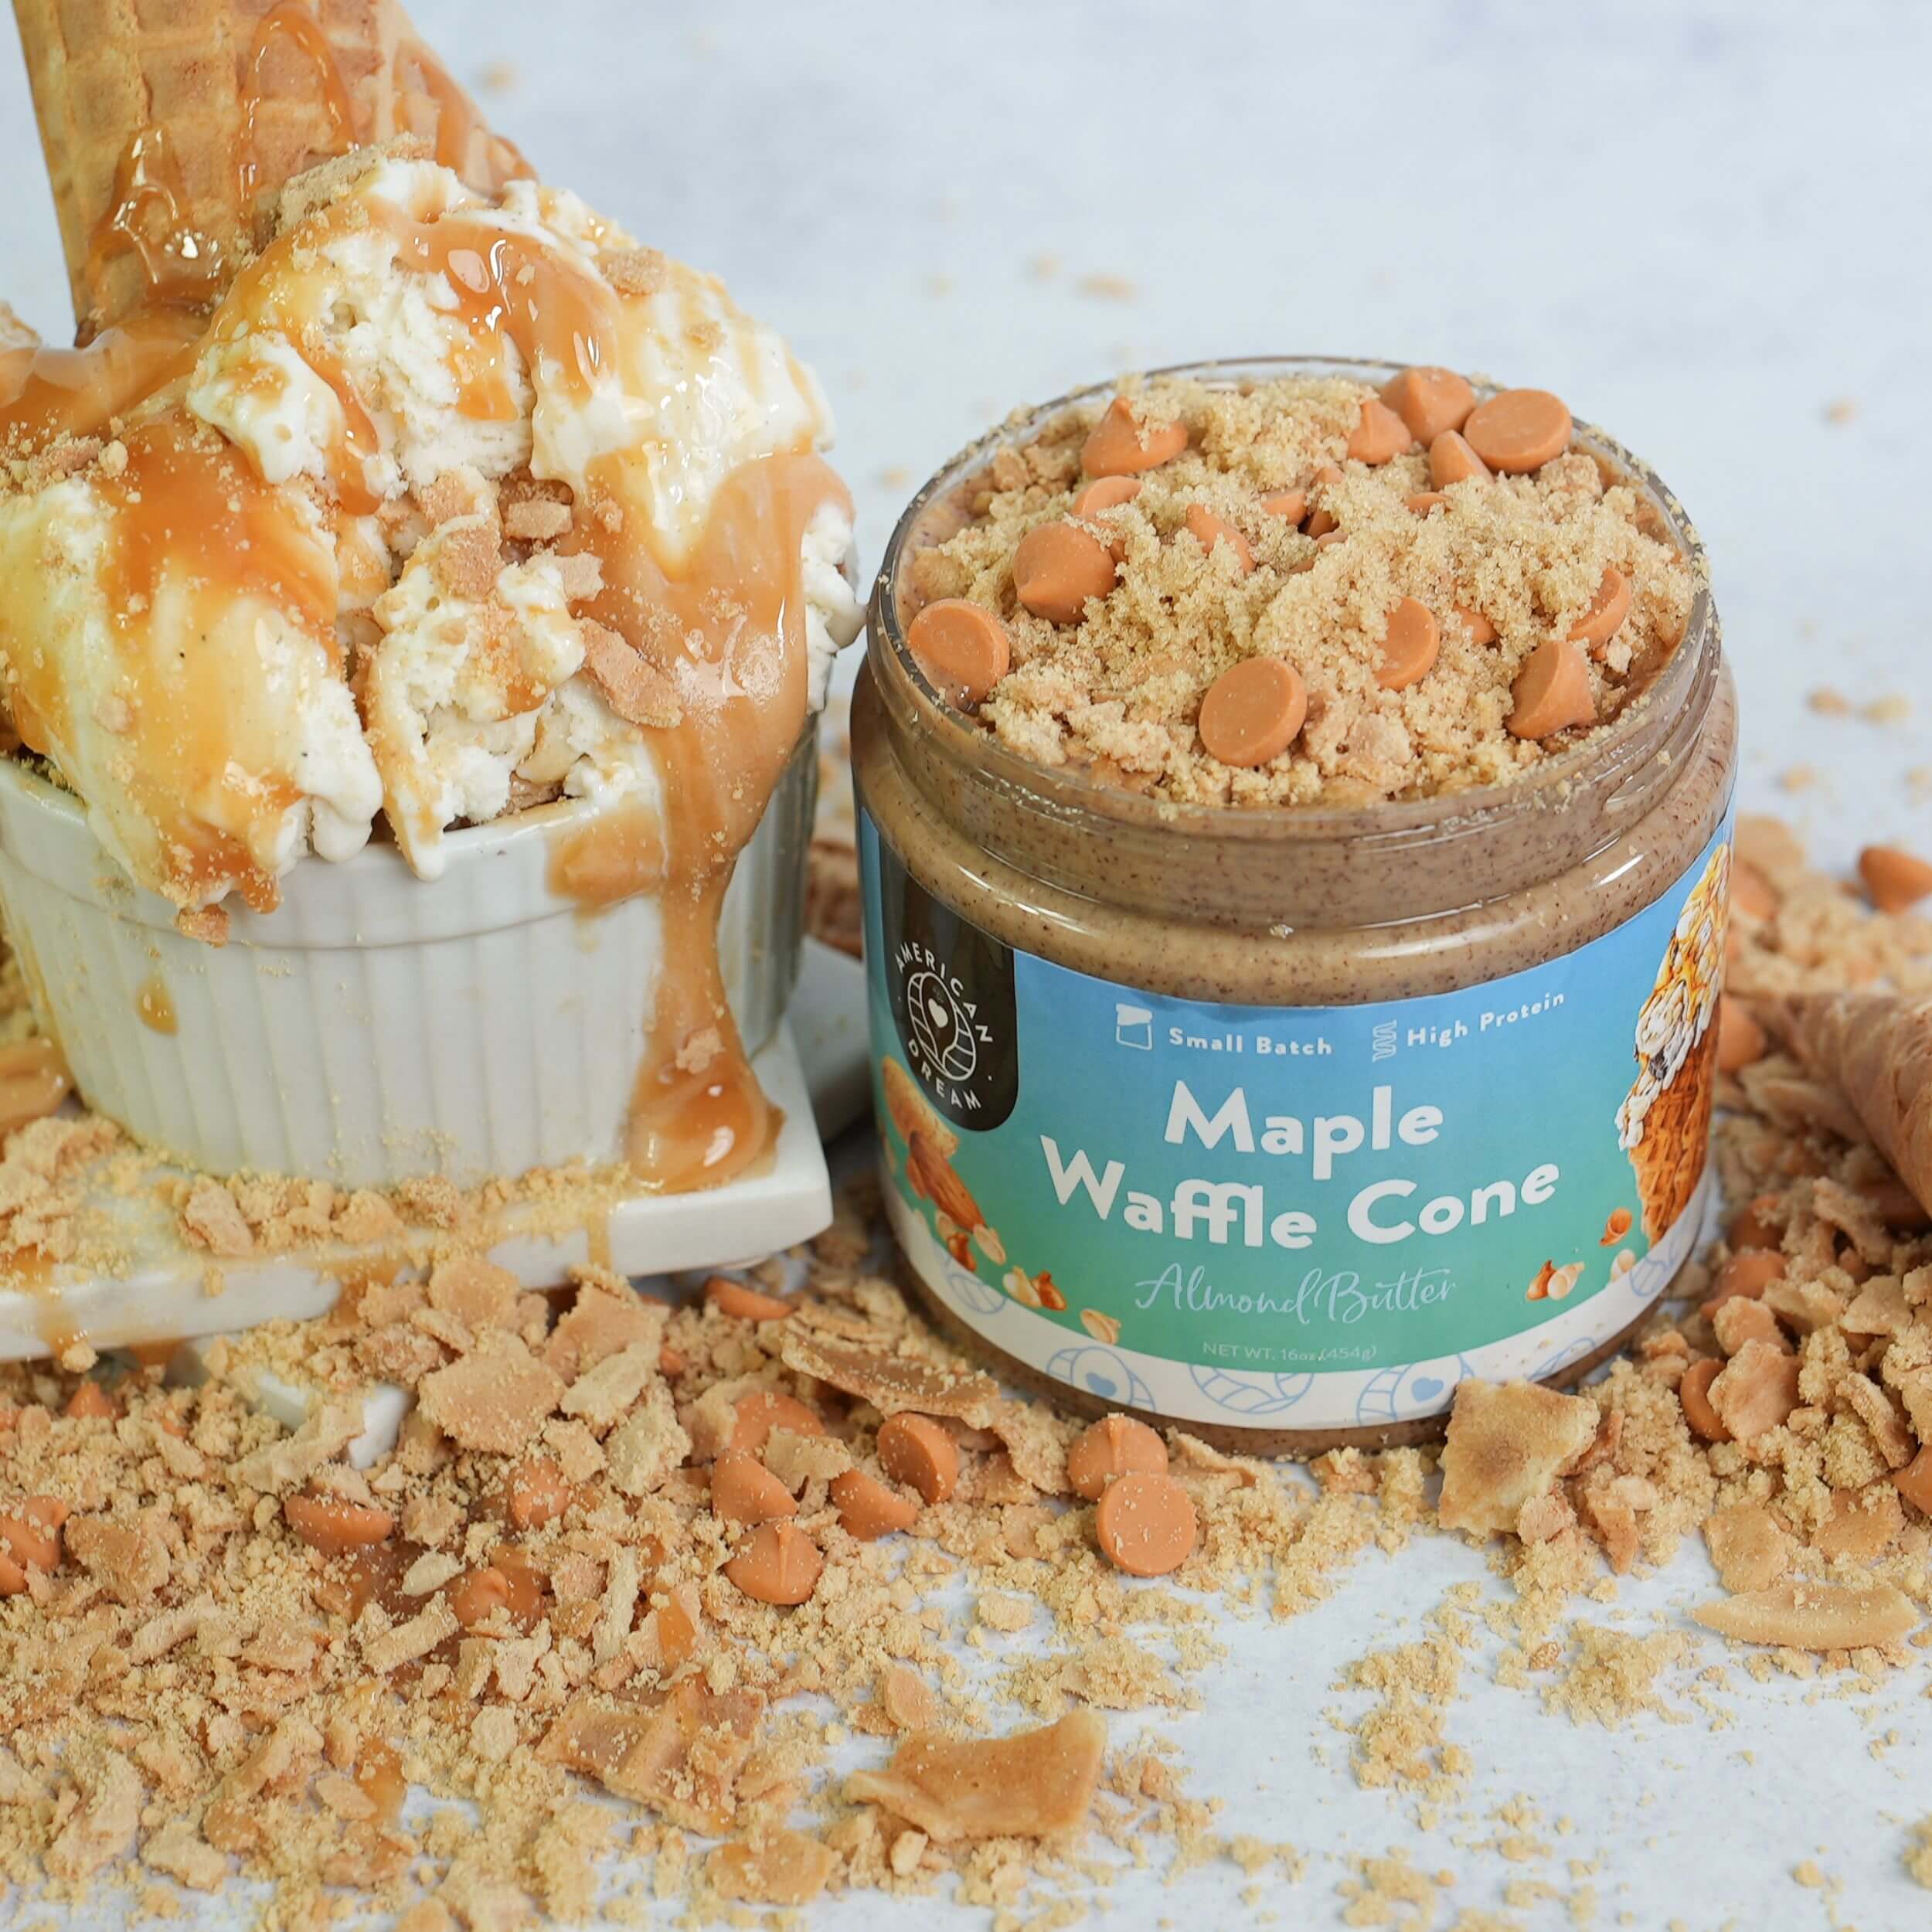 Maple Waffle Cone Almond Butter